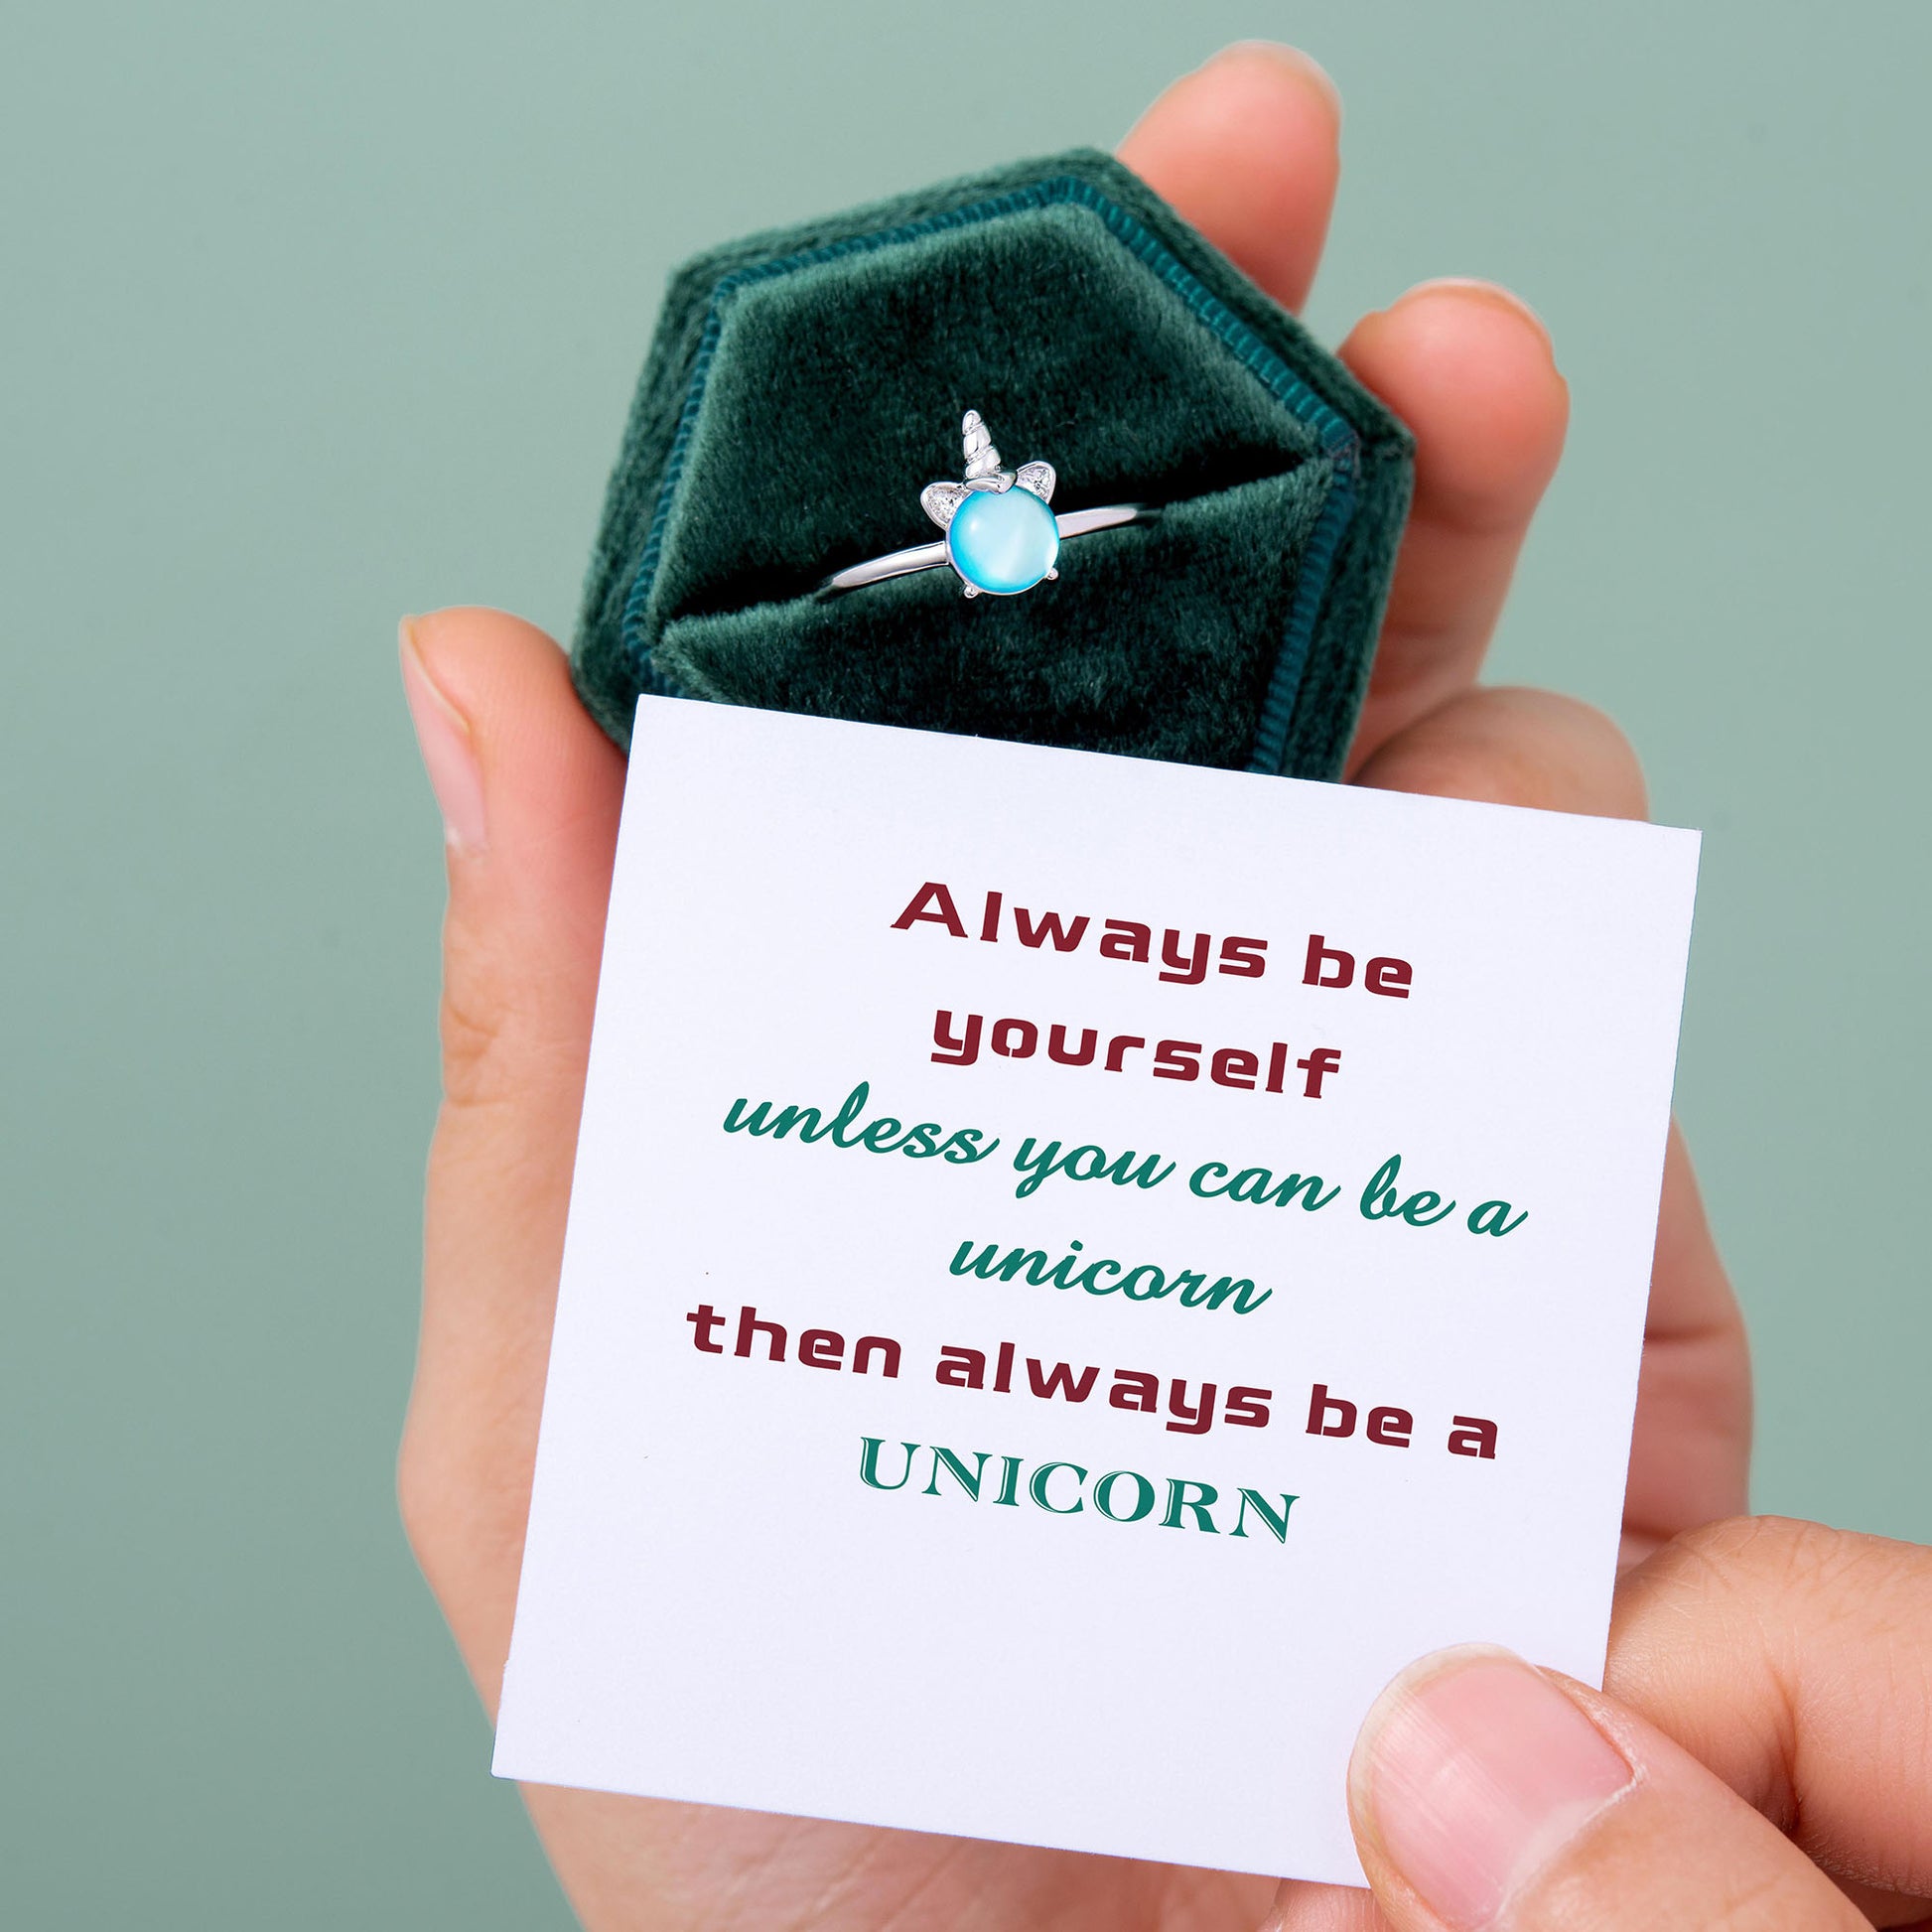 “Always be yourself, unless you can be a unicorn, then always be a unicorn” Ring [🌿 Ring +💌 Gift Card + 🎁 Gift Bag + 💐 Gift Bouquet] - SARAH'S WHISPER